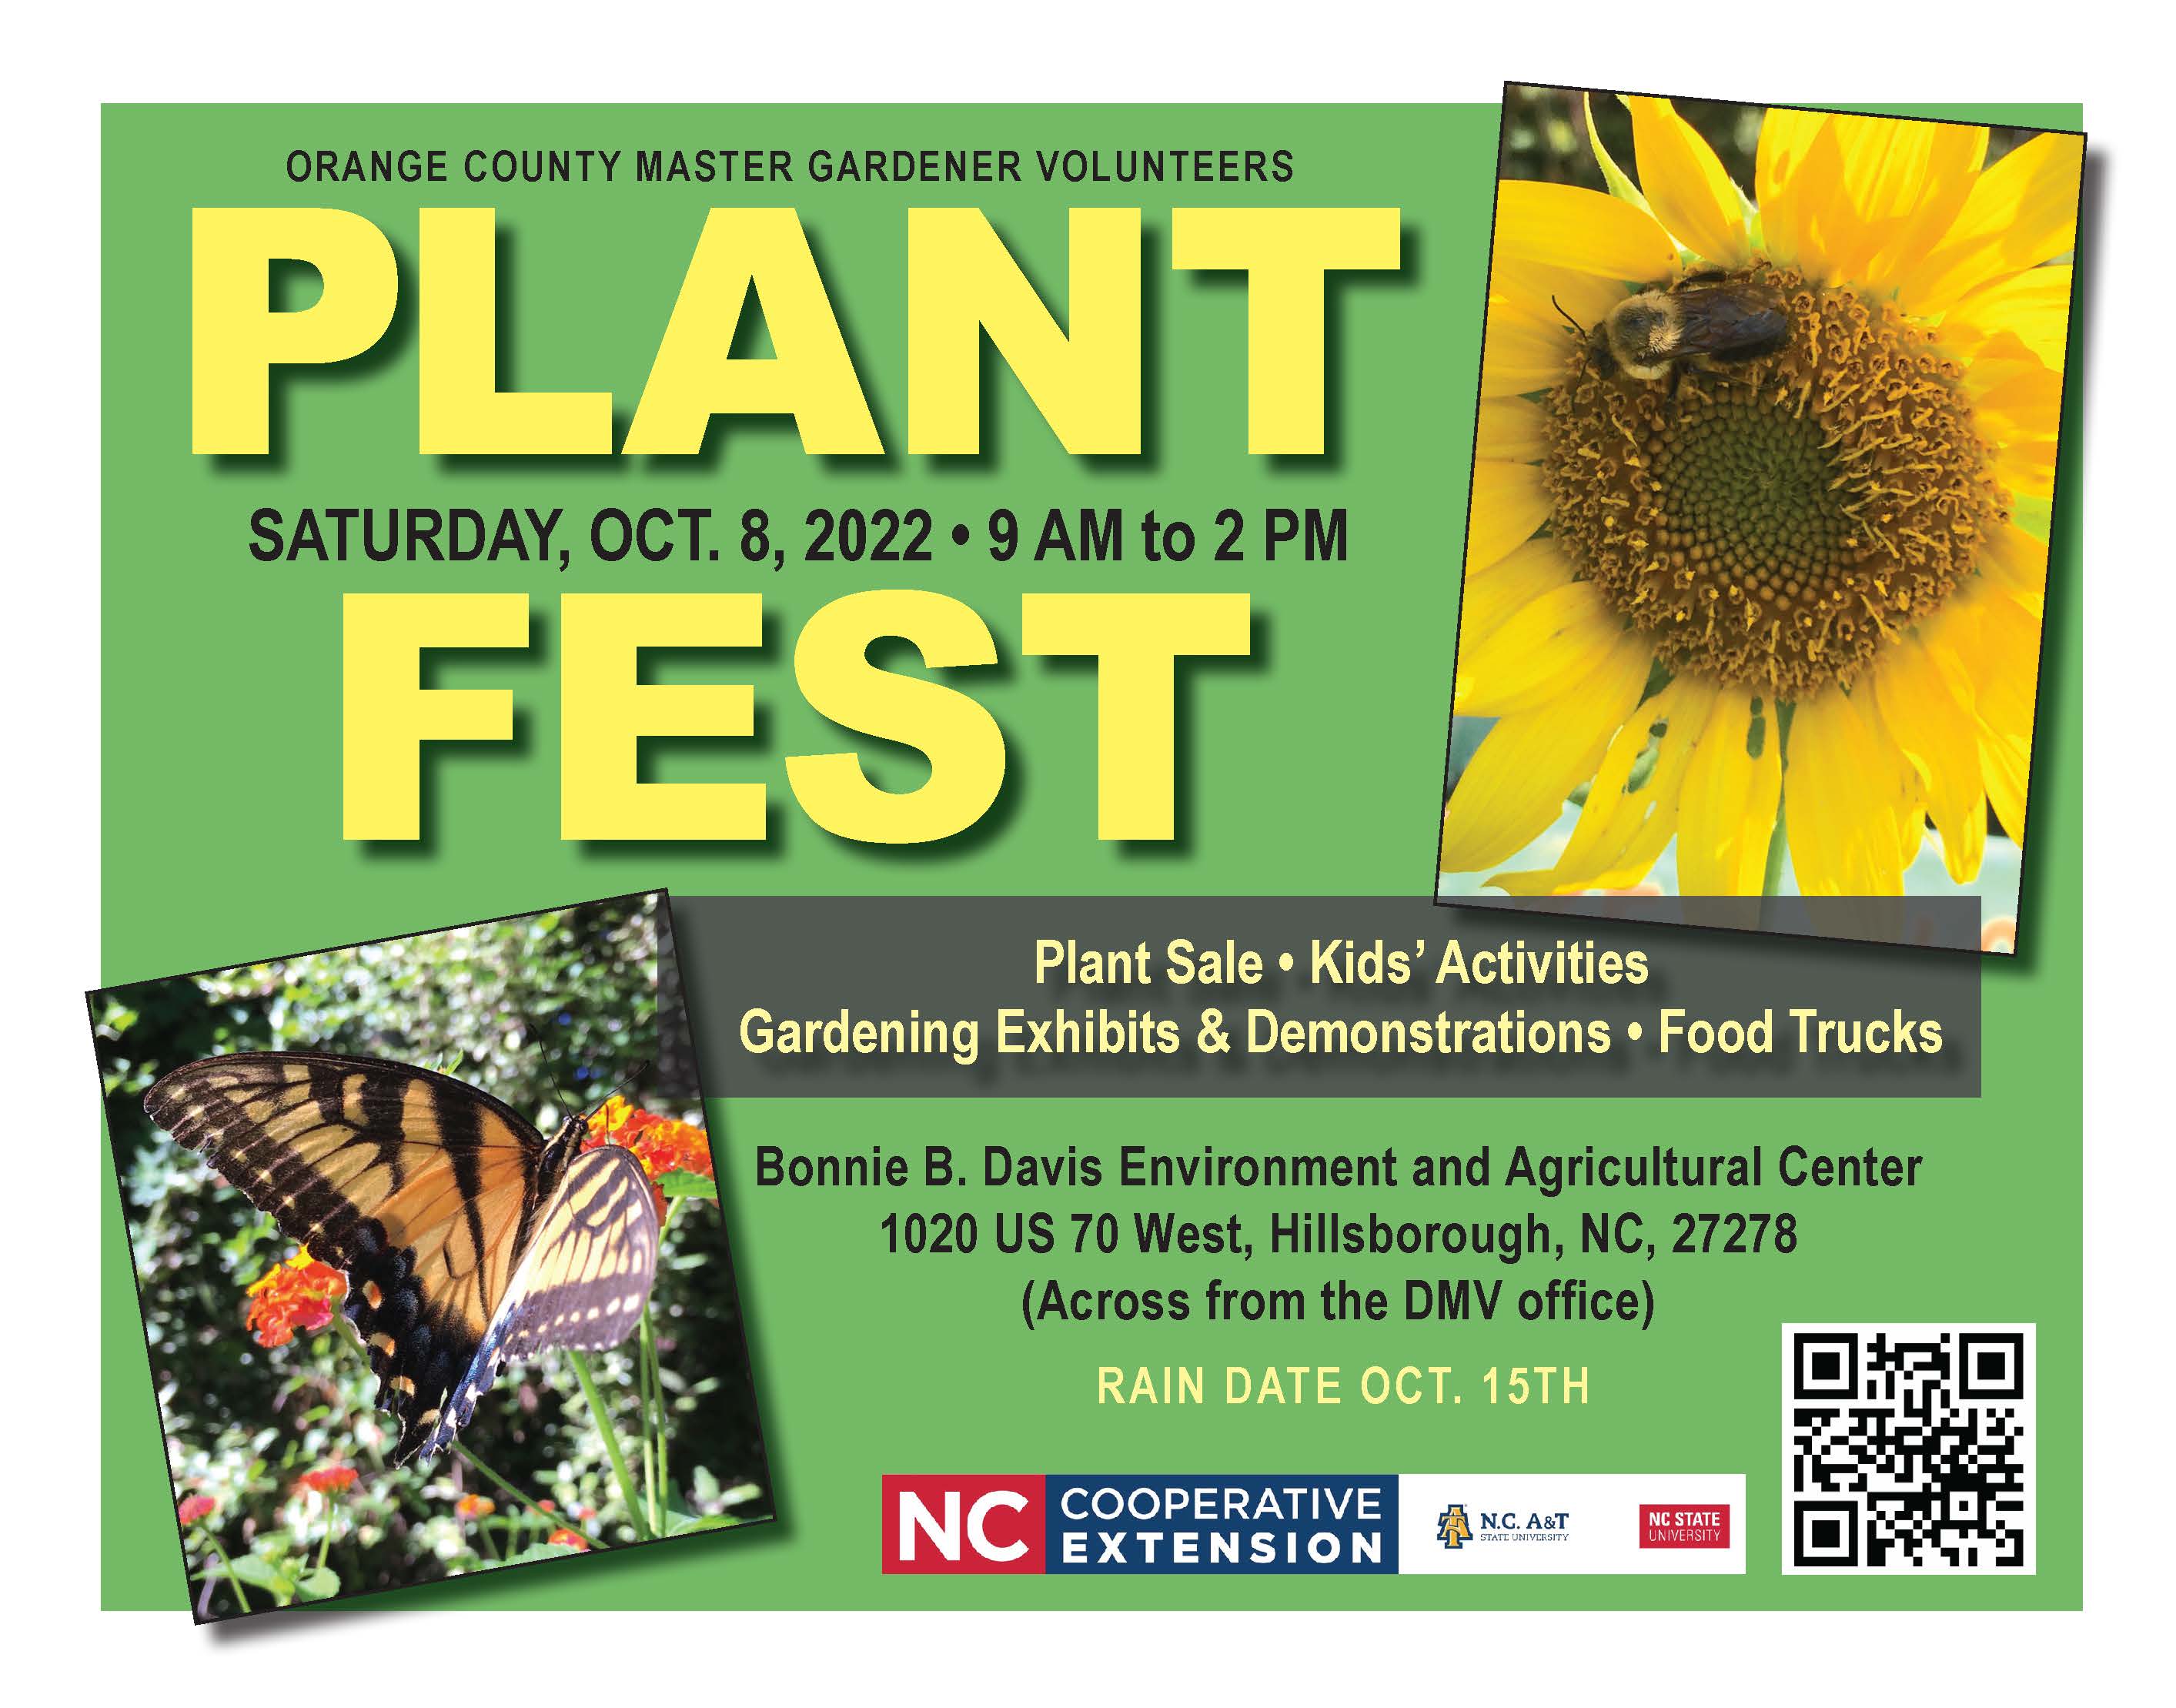 Plant Fest Flyer. Saturday, October 8, 2022. 9:00 a.m. – 2:00 p.m. Plant Sale, Kids' Activities, Gardening Exhibits & Demonstrations, and Food Trucks. Bonne B. Davis Environment and Agricultural Center 1020 US 70 West, Hillsborough, NC, 27278. Rain Date October, 15.